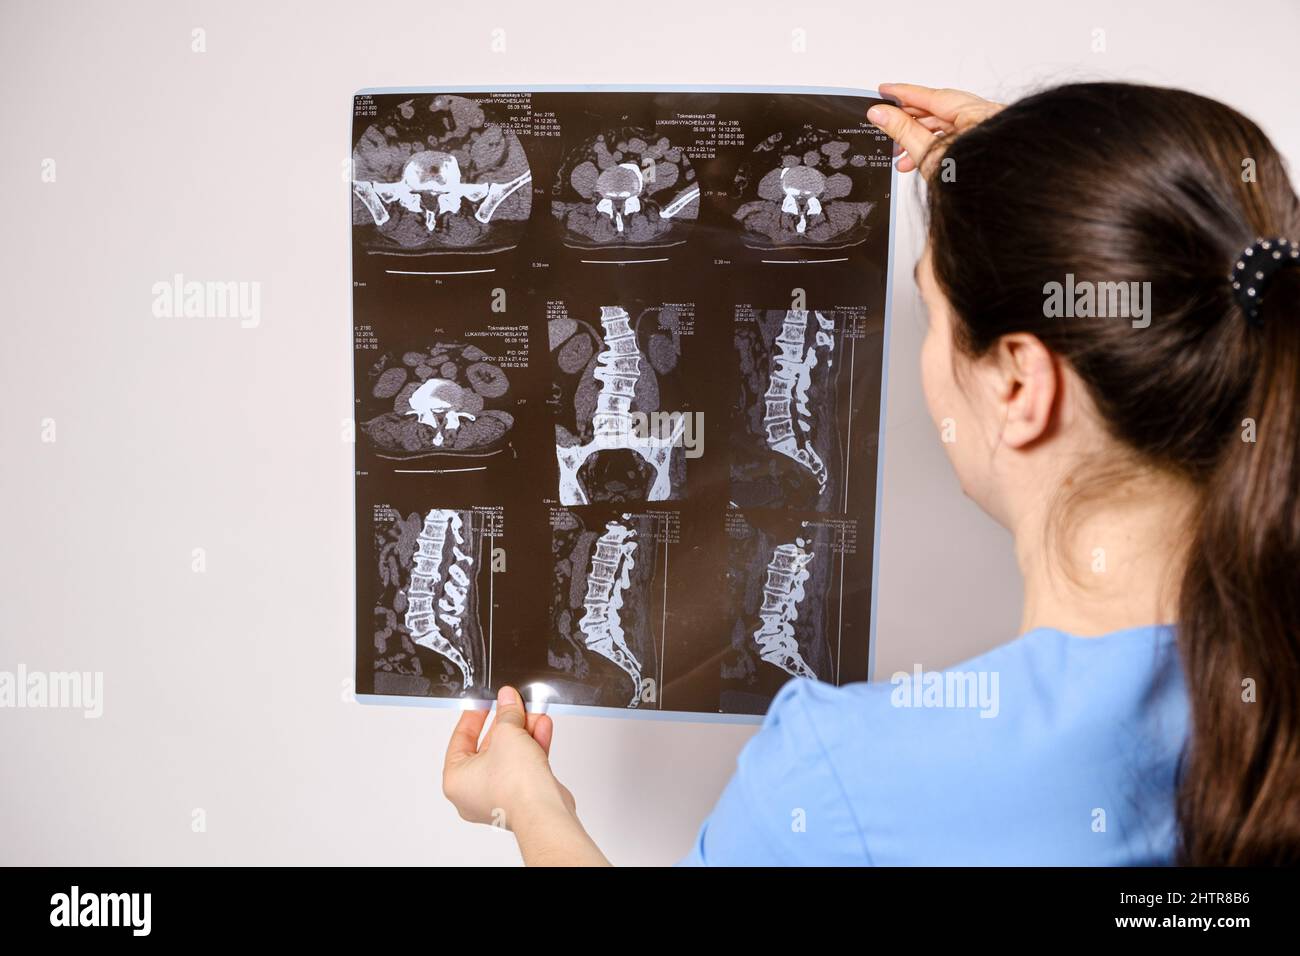 The doctor holds a CT scan of the spine of a patient with scoliosis and protrusion of the intervertebral discs Stock Photo